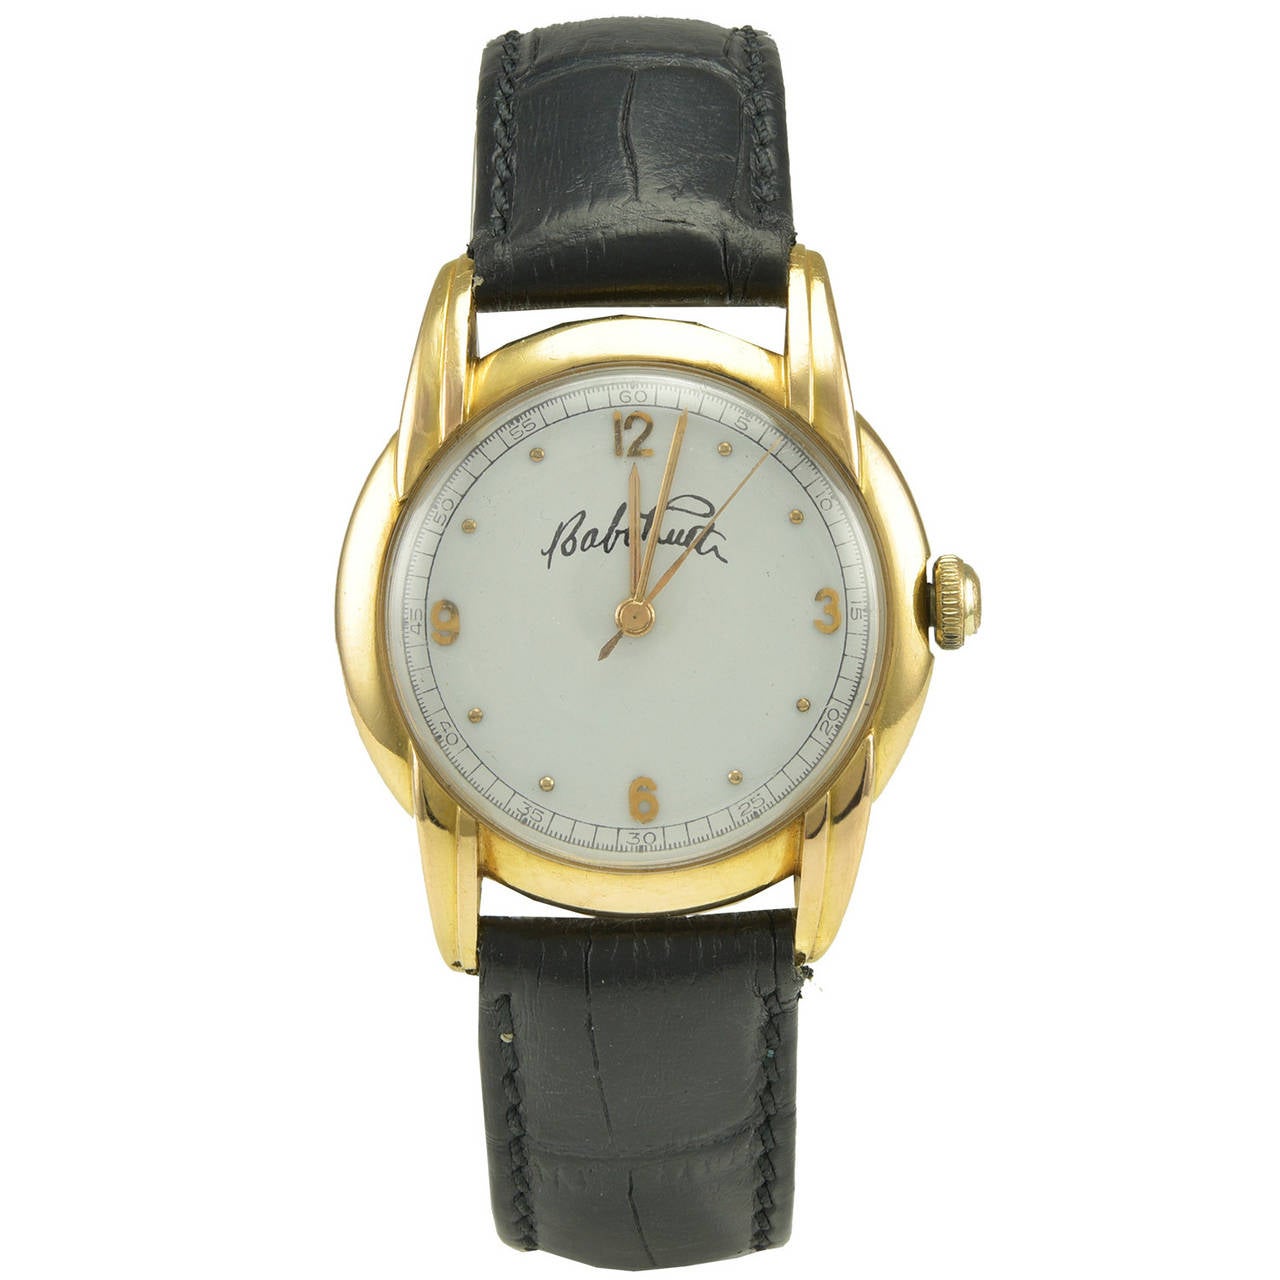 "Babe Ruth" Gold Watch